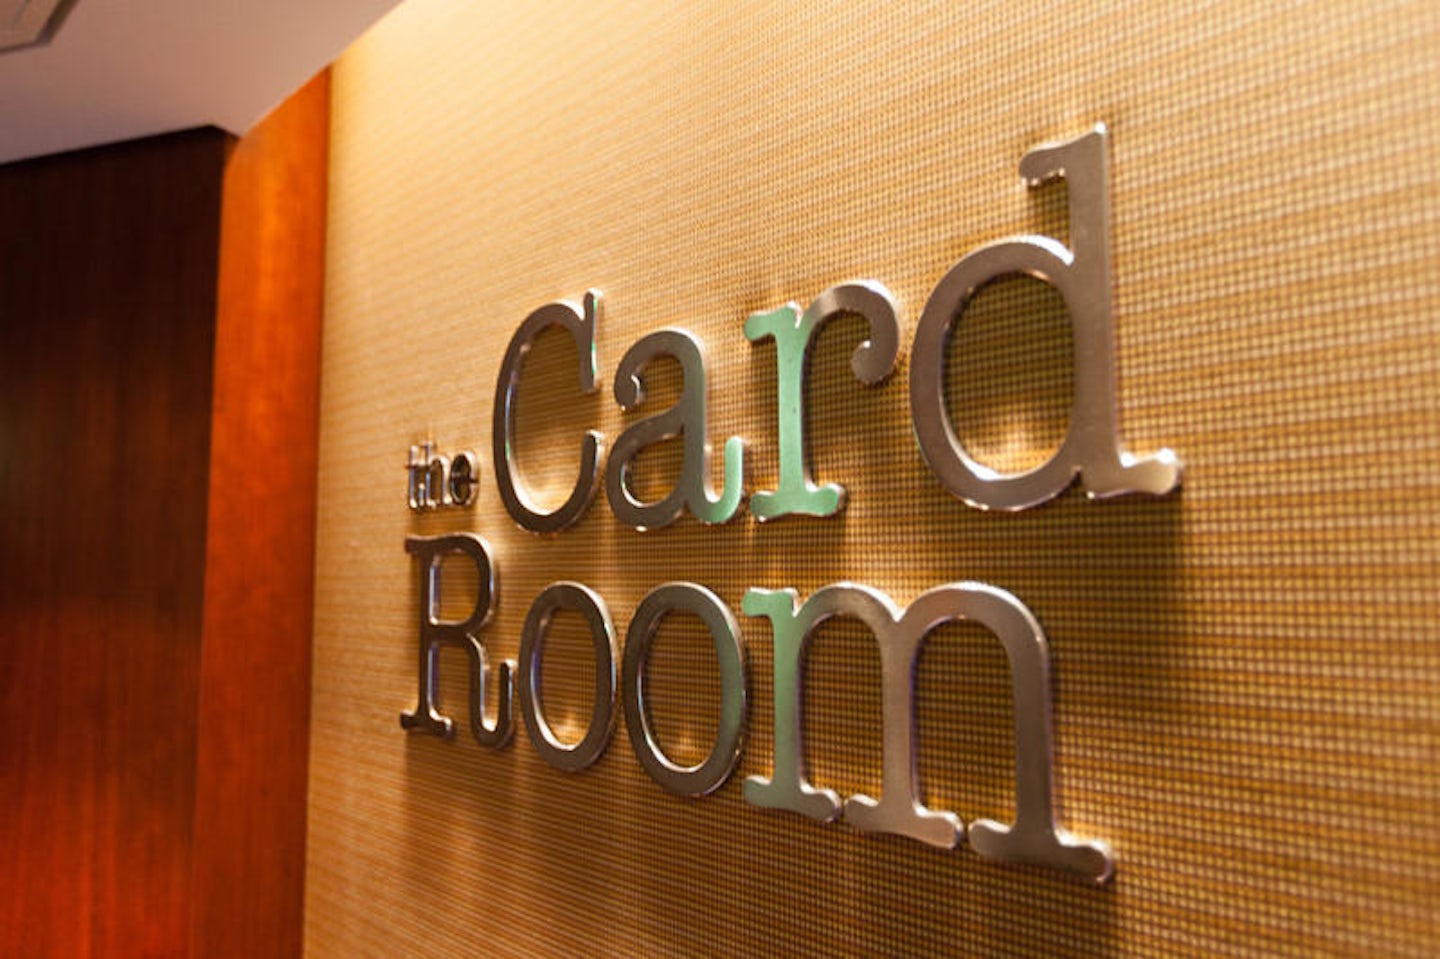 The Card Room on Celebrity Silhouette